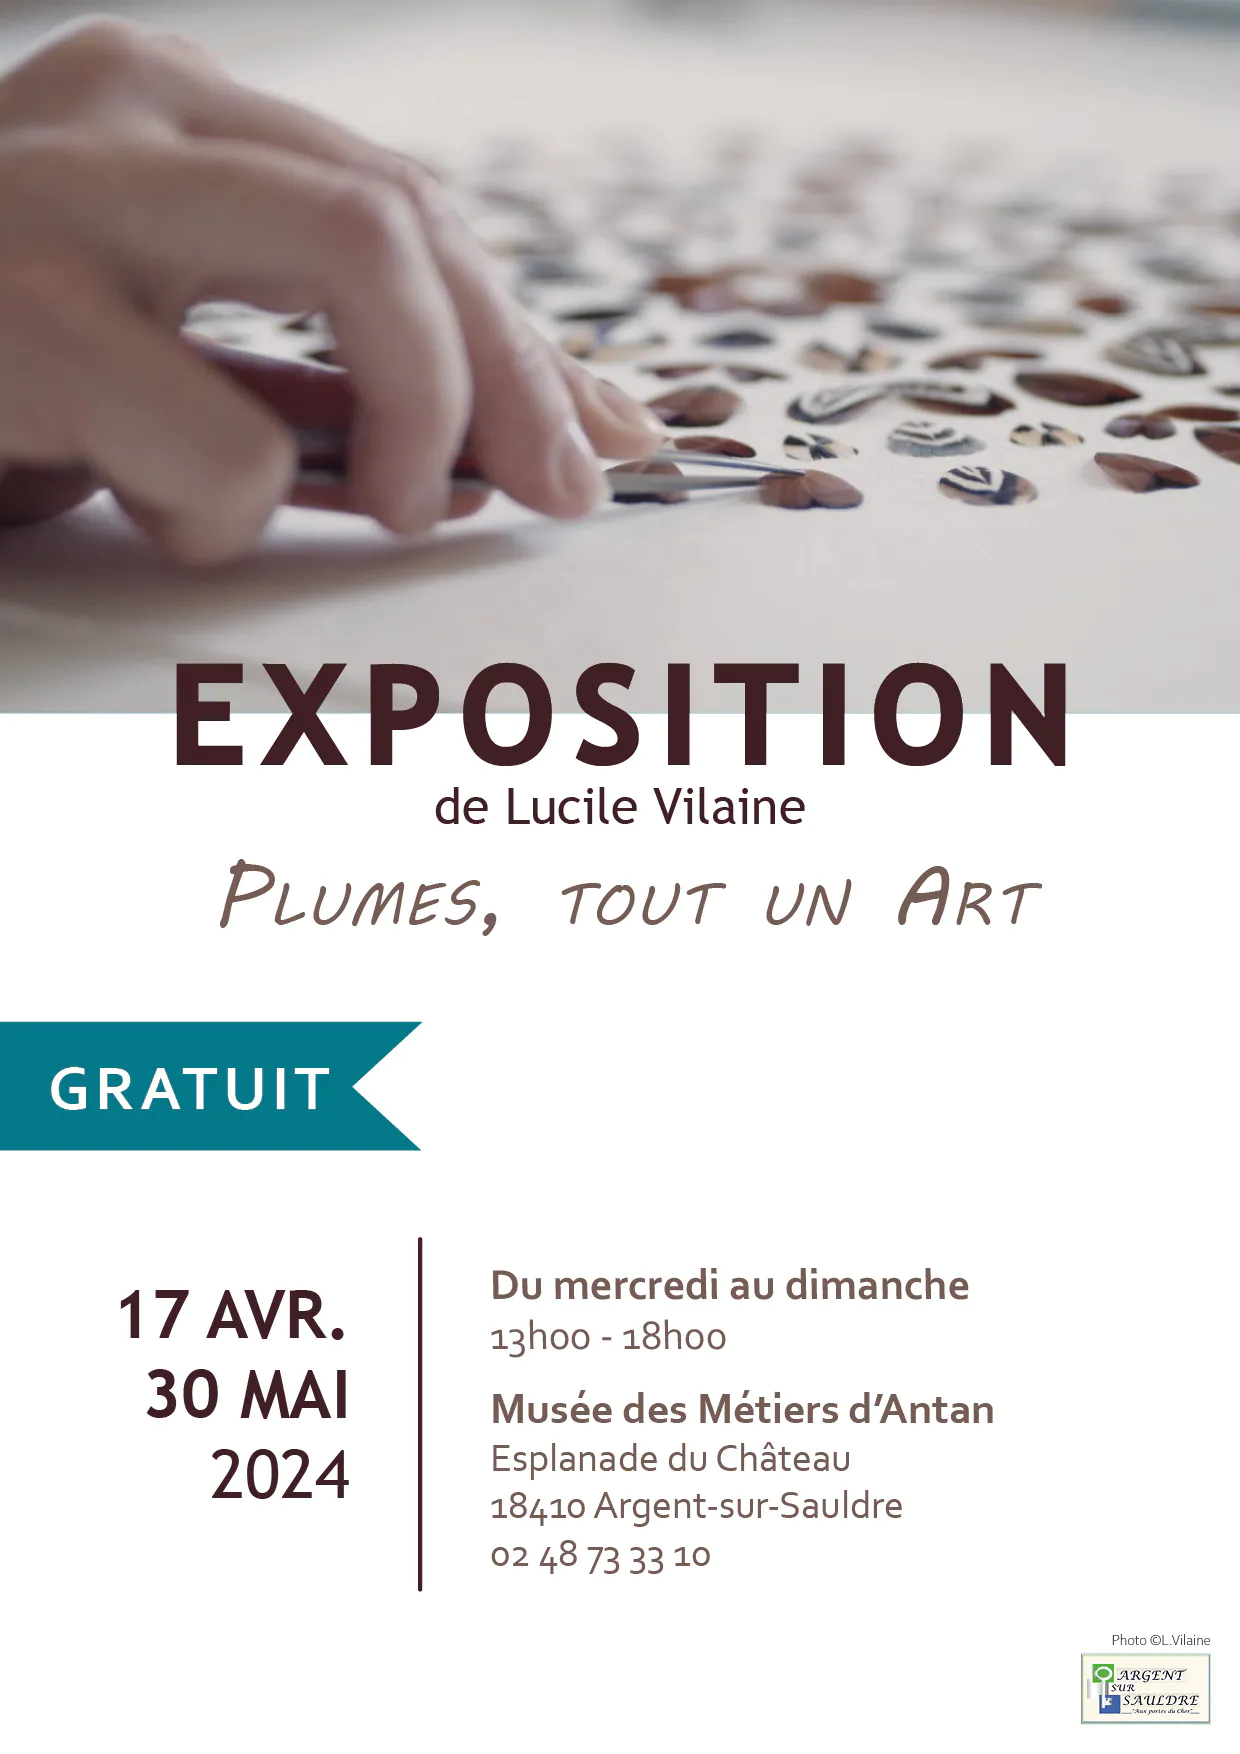 Exposition "Plumes